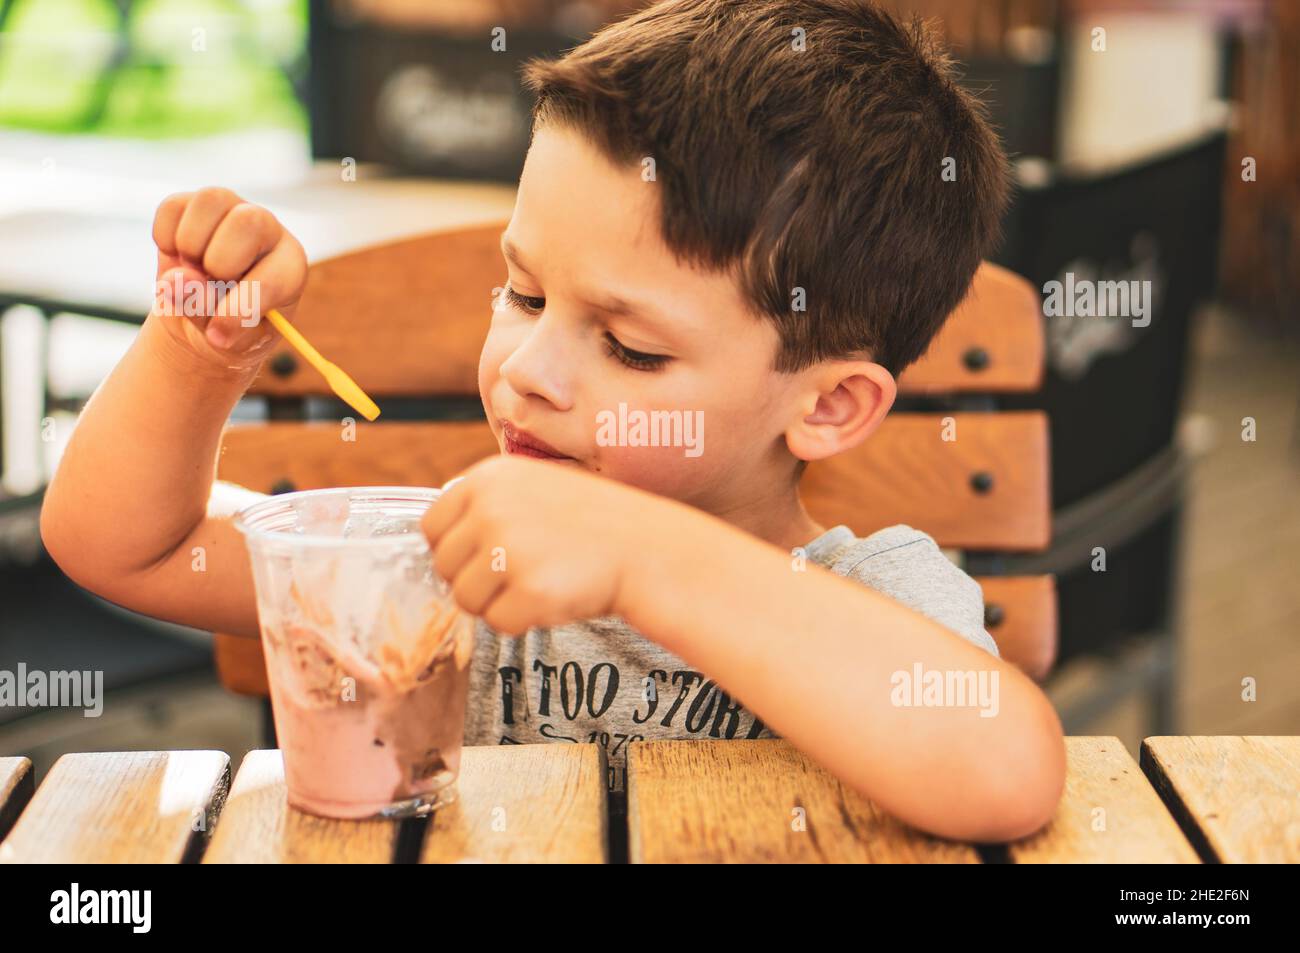 Closeup shot of a young boy eating ice cream from a plastic cup by a wooden table at a bar Stock Photo